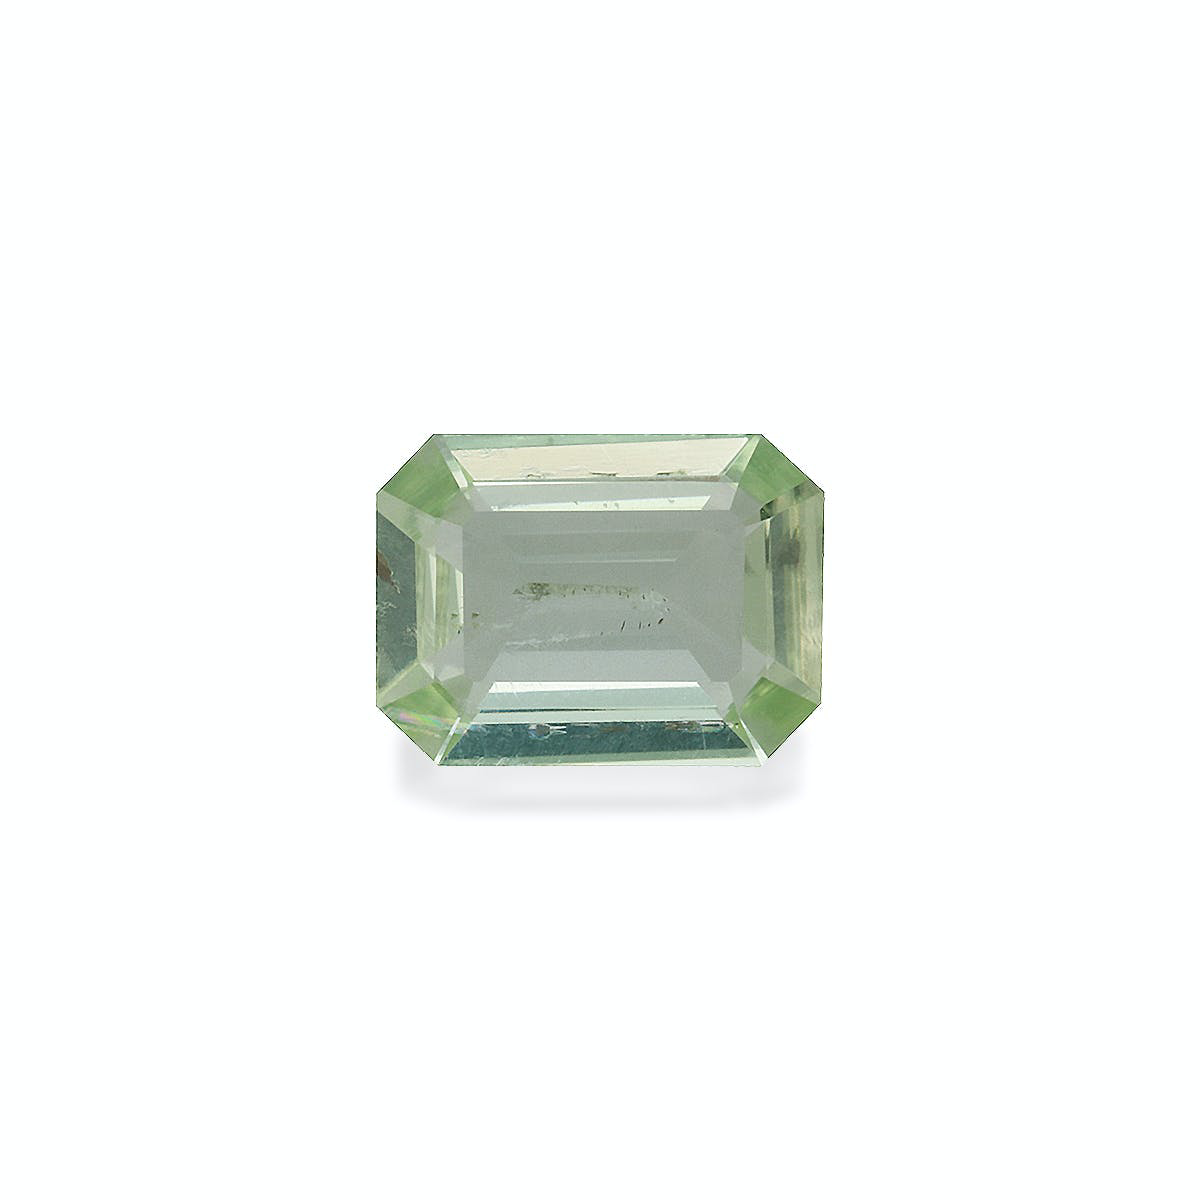 Picture of Pale Green Tourmaline 1.29ct - 8x6mm (TG1277)